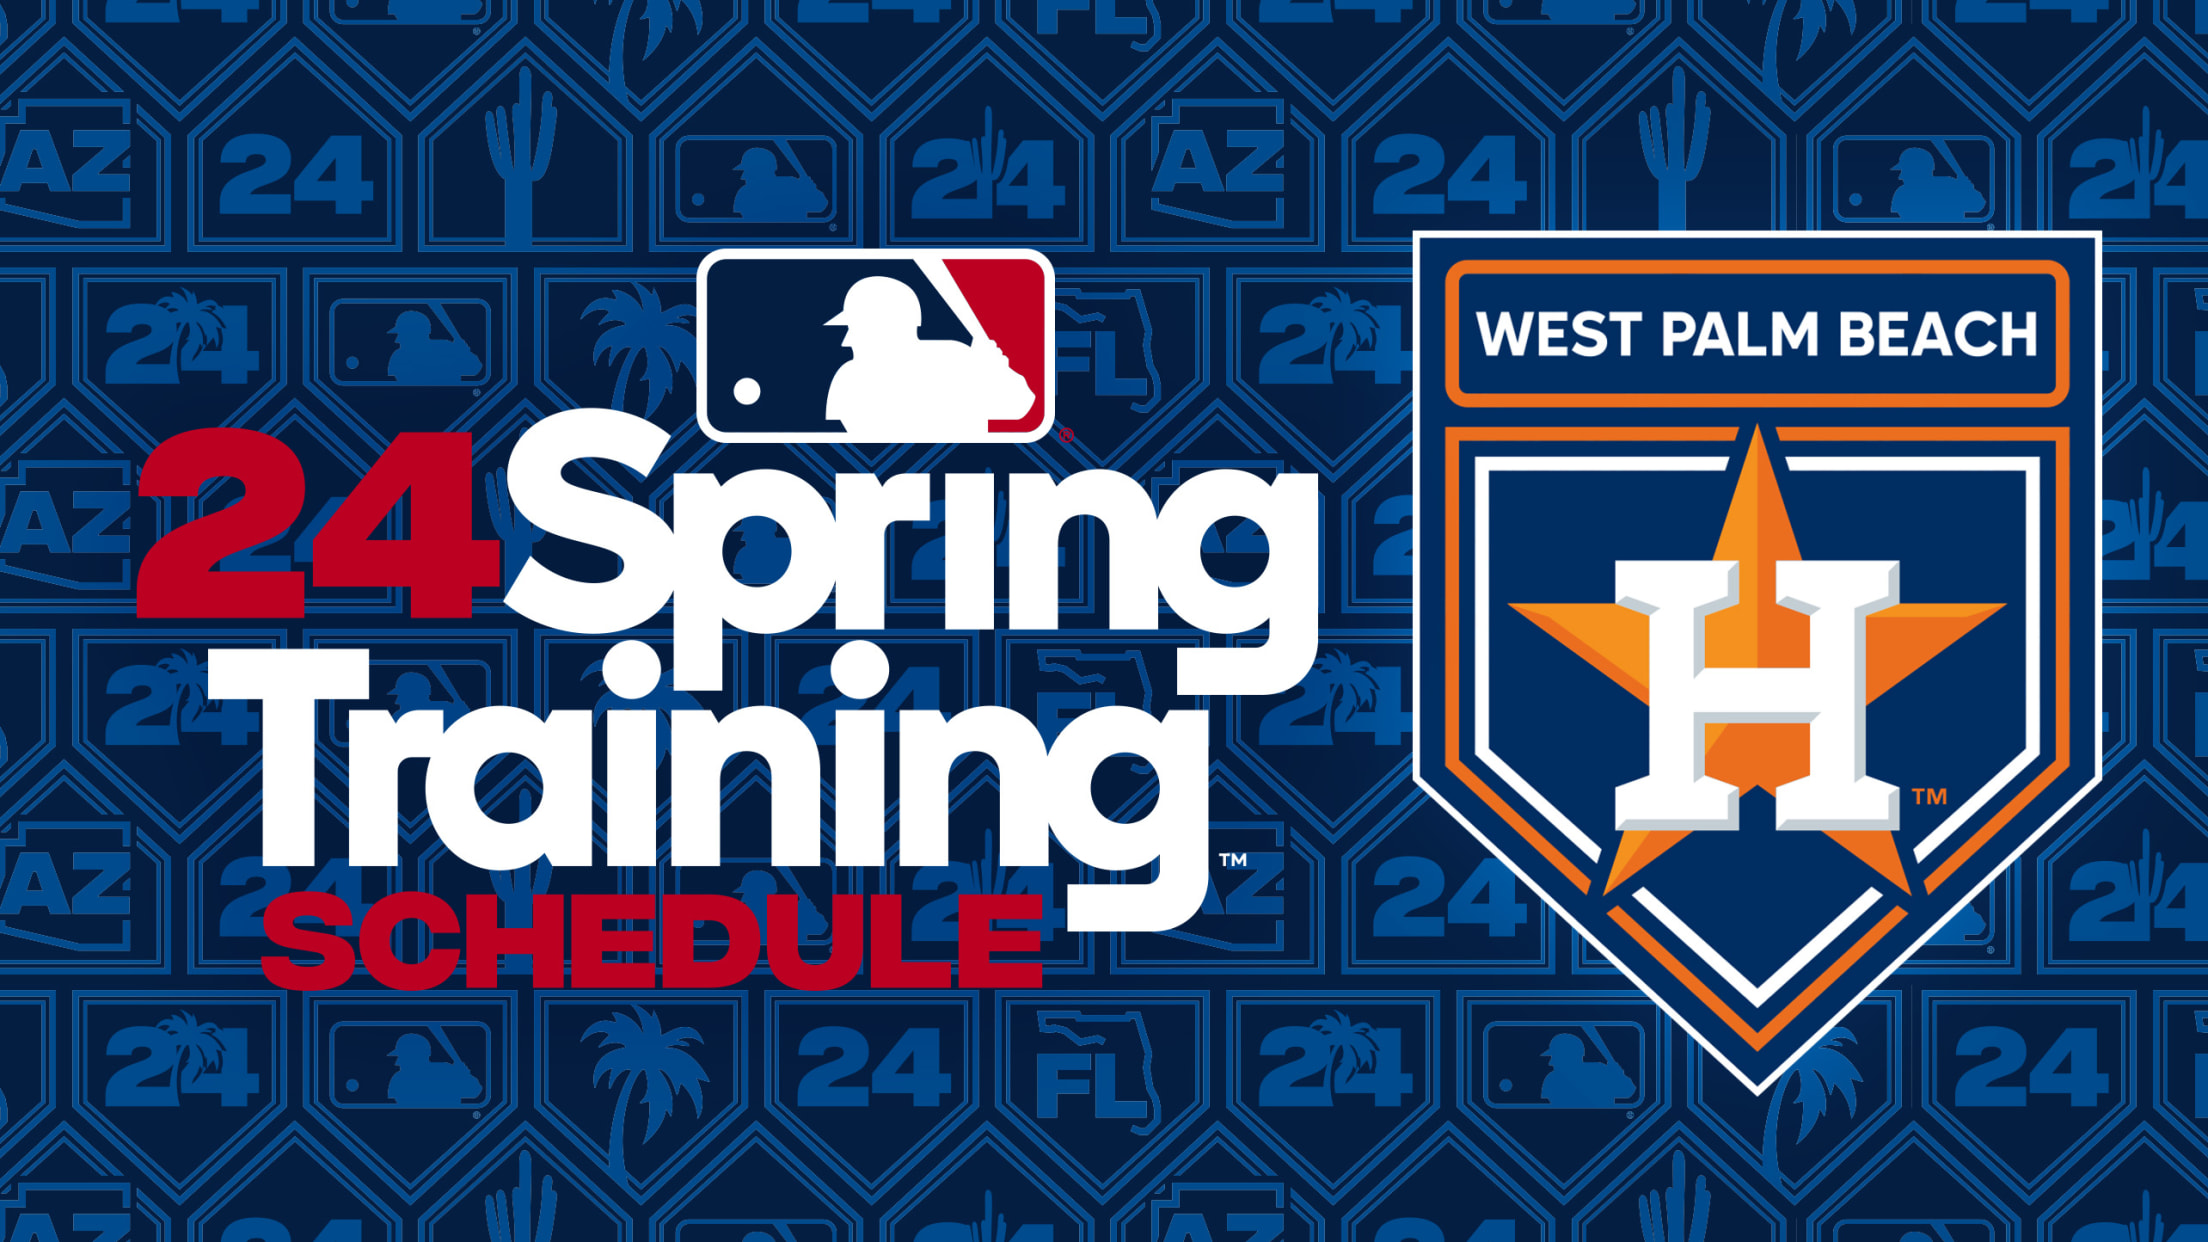 Houston Astros: Heavy hearts weigh within Spring Training